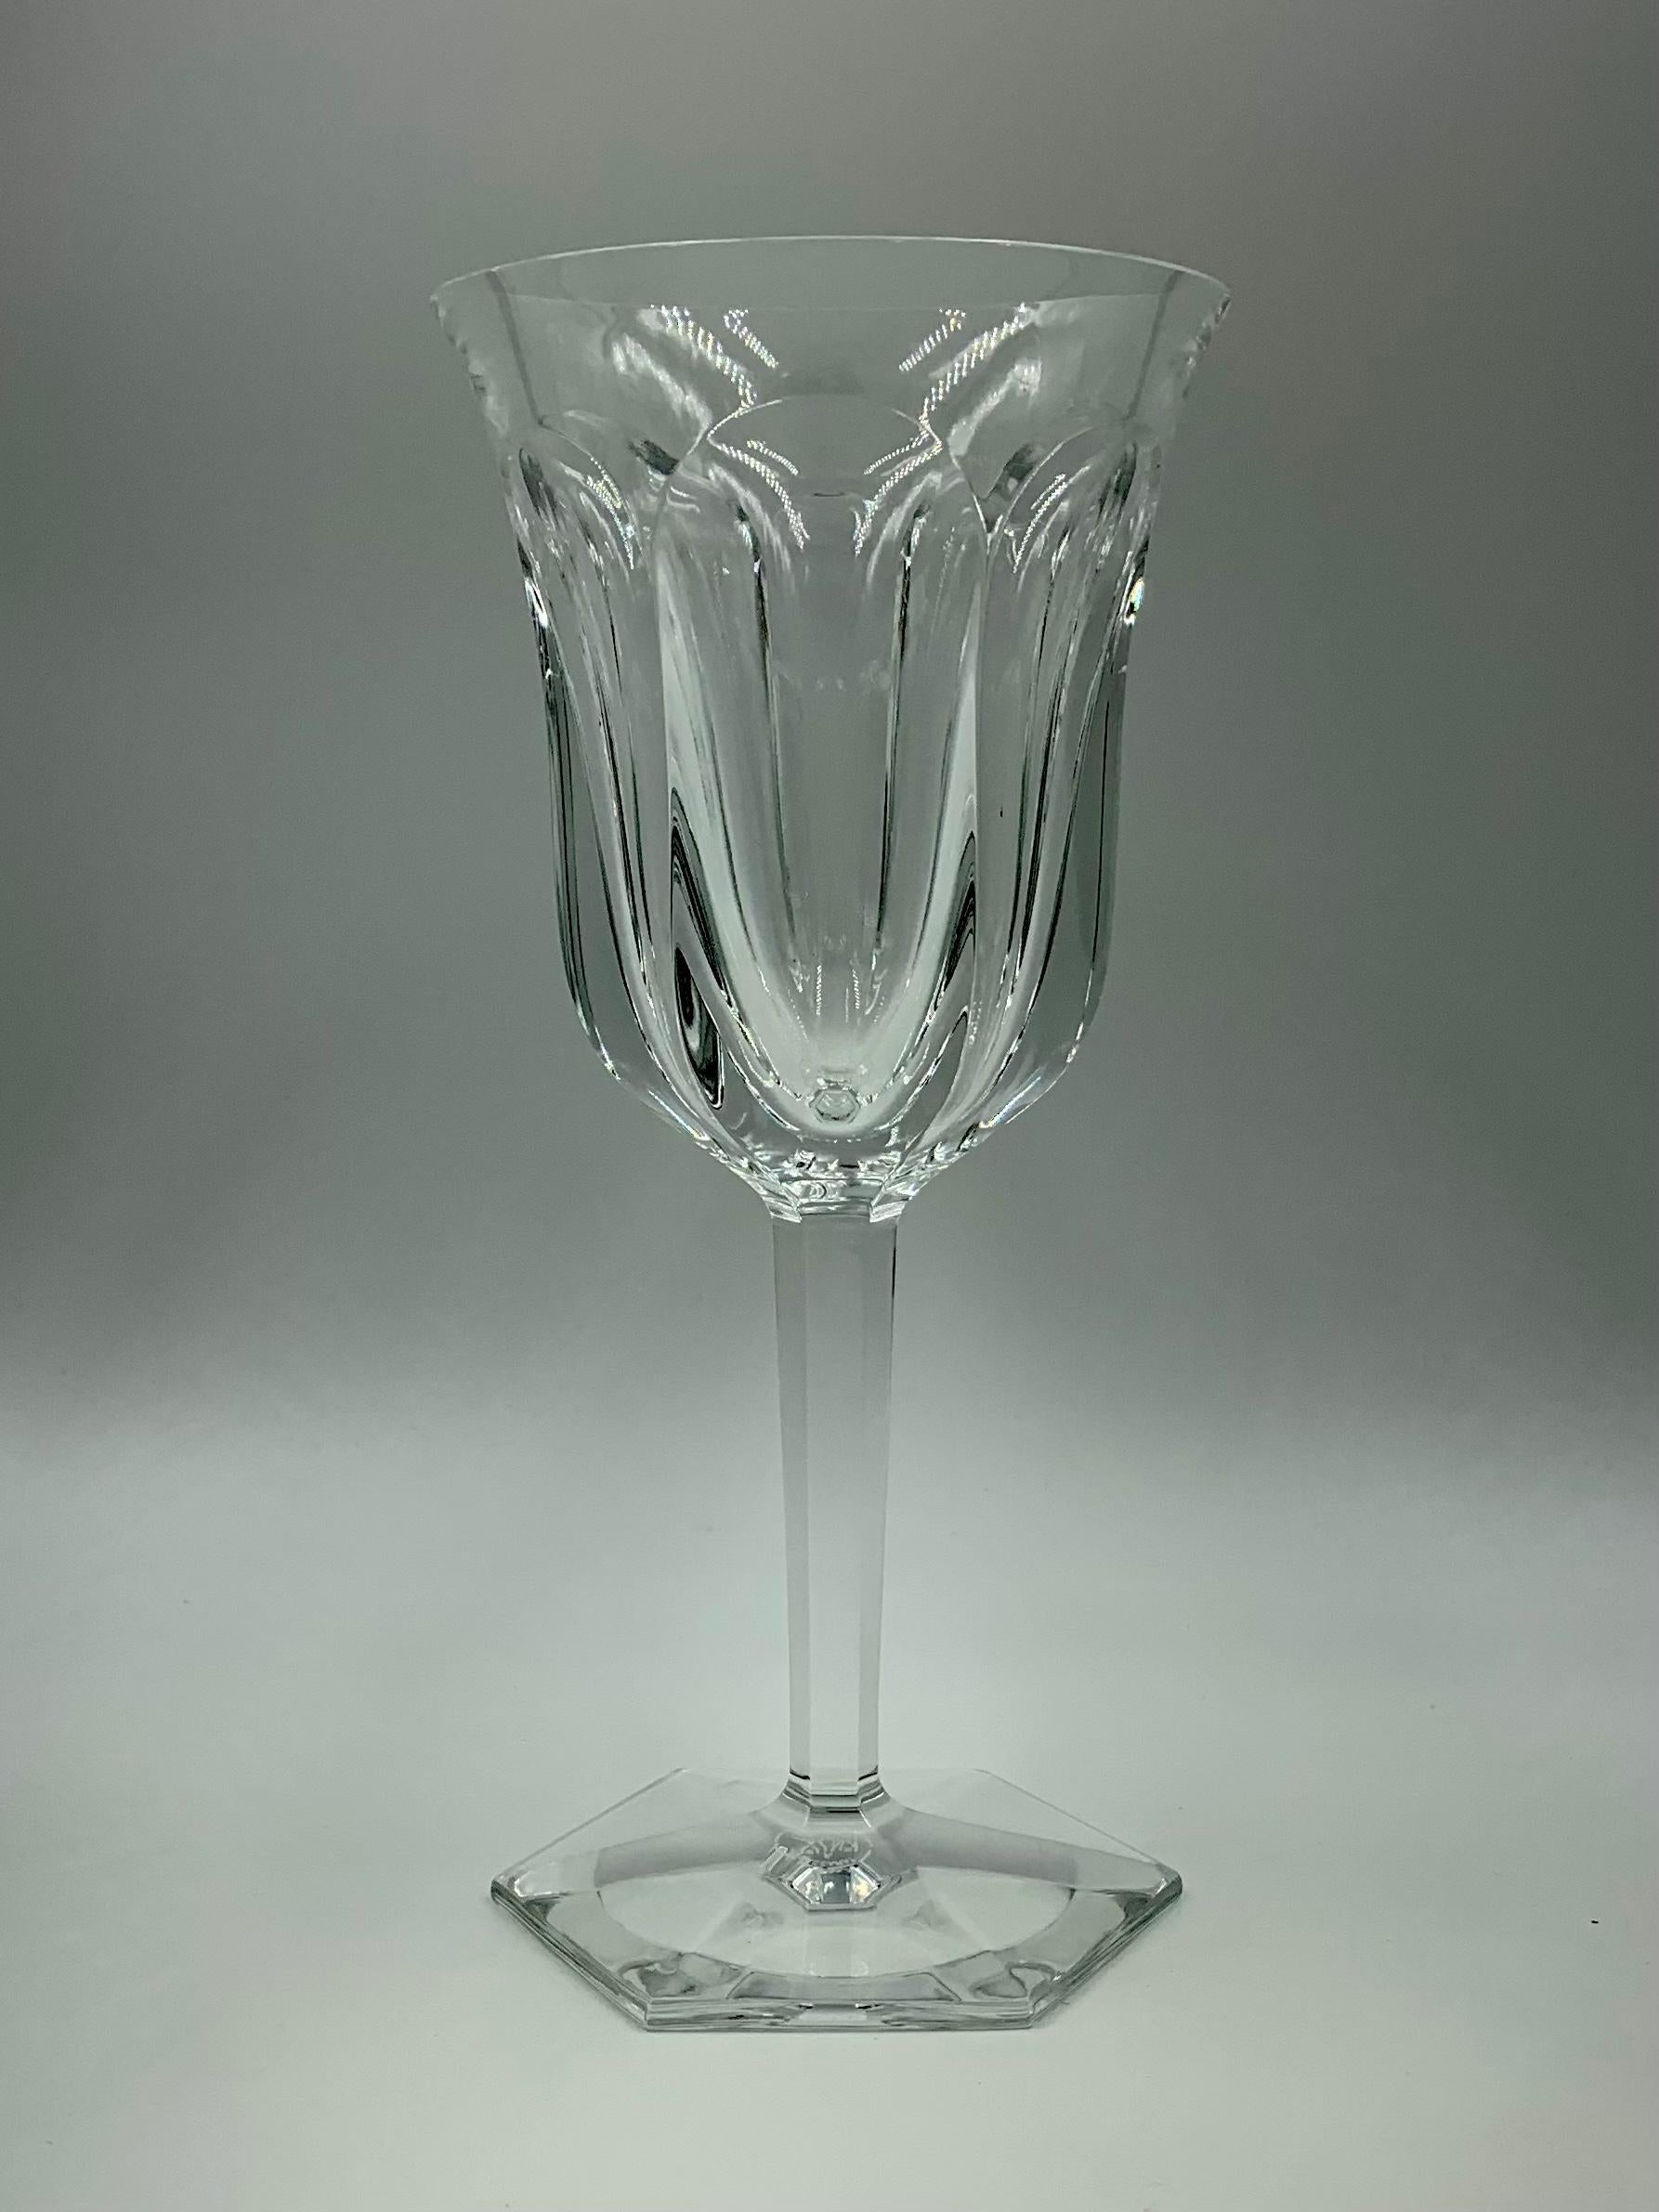 Named after the famed Chateau de Malmaison, Empress Josephine's favorite residence, this is one of Baccarat's most elegant designs. Josephine purchased Malmaison while Napoleon was away in Egypt in 1799. The castle was decorated by Percier and